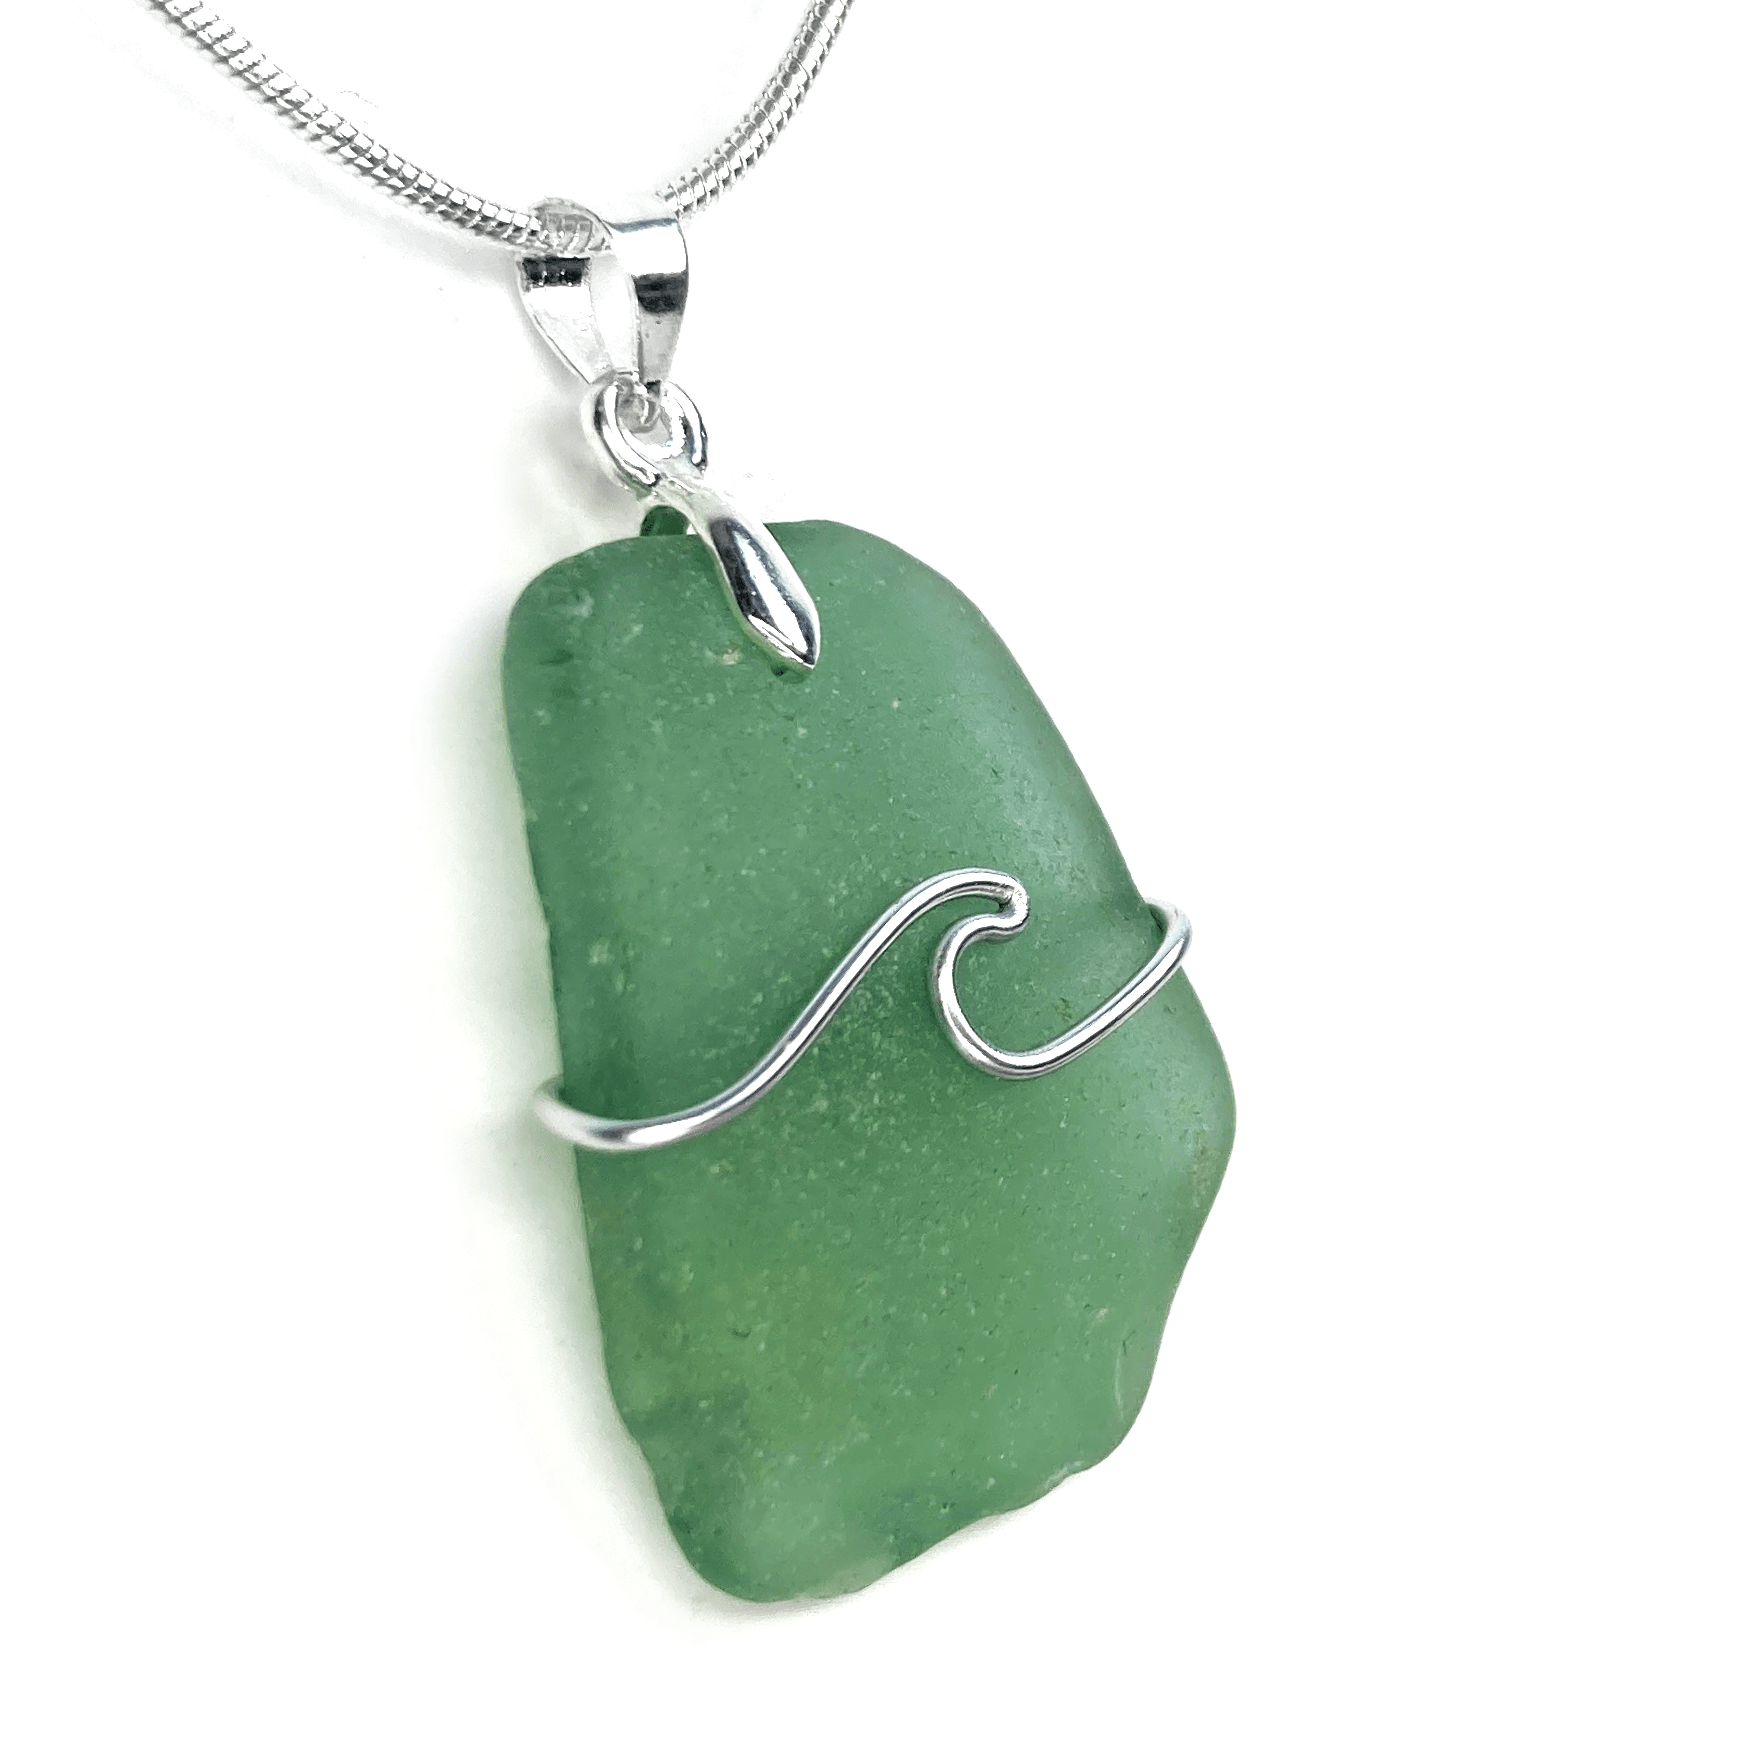 Sea Glass Pendant - Olive Green Wave Wire Wrapped Necklace - Scottish Silver Jewellery - East Neuk Beach Crafts